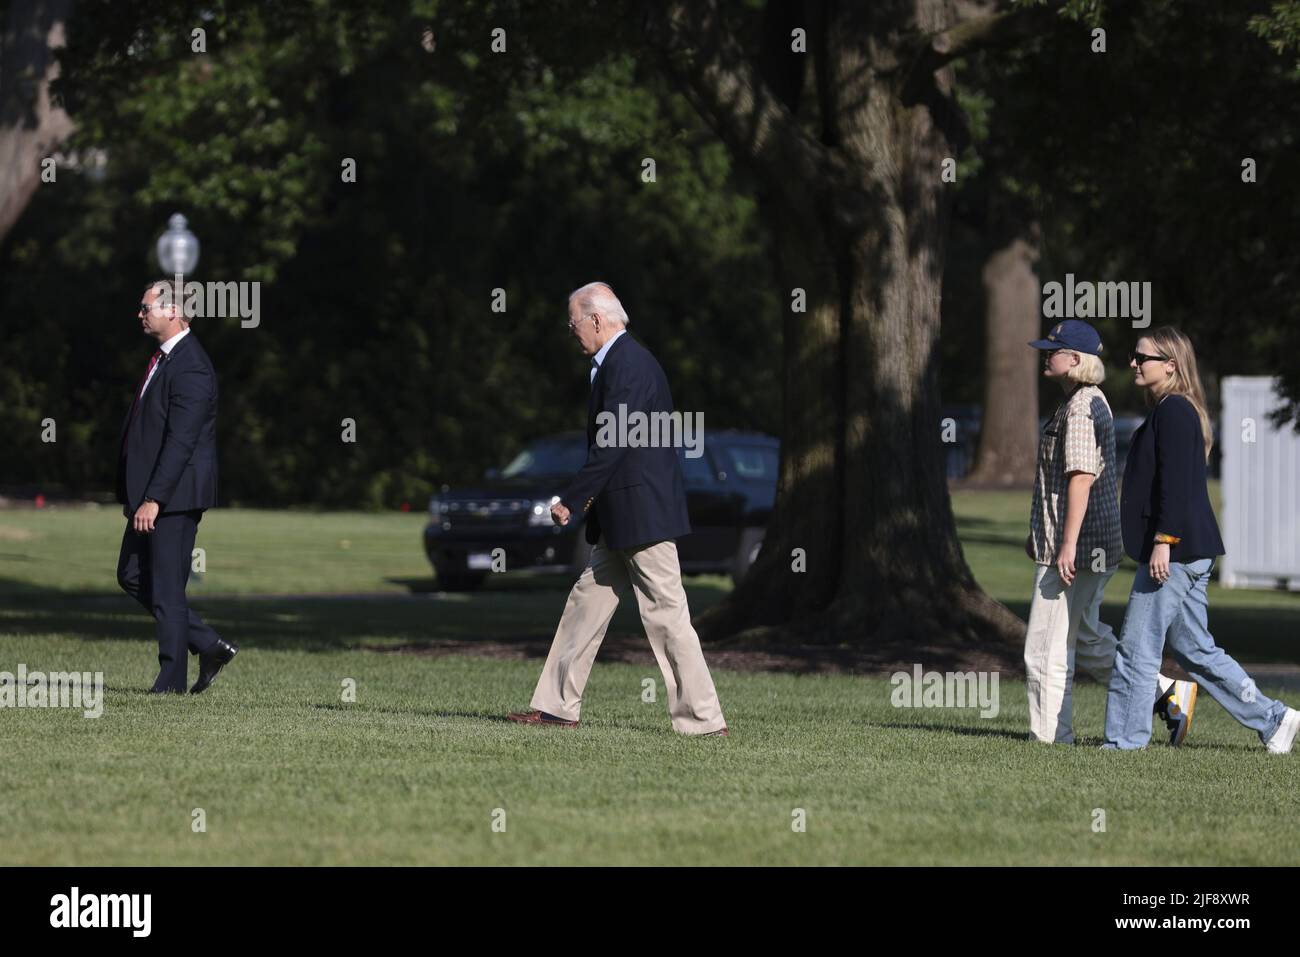 Washington, United States. 30th June, 2022. President Joe Biden, arrives on the South Lawn of the White House alongside his 2 granddaughters, Finnegan Biden and Maisy Biden, on Thursday, June 30, 2022 in Washington, DC. Biden returned to Washington after attending summits in Germany and Spain. Photo by Oliver Contreras/UPI Credit: UPI/Alamy Live News Stock Photo